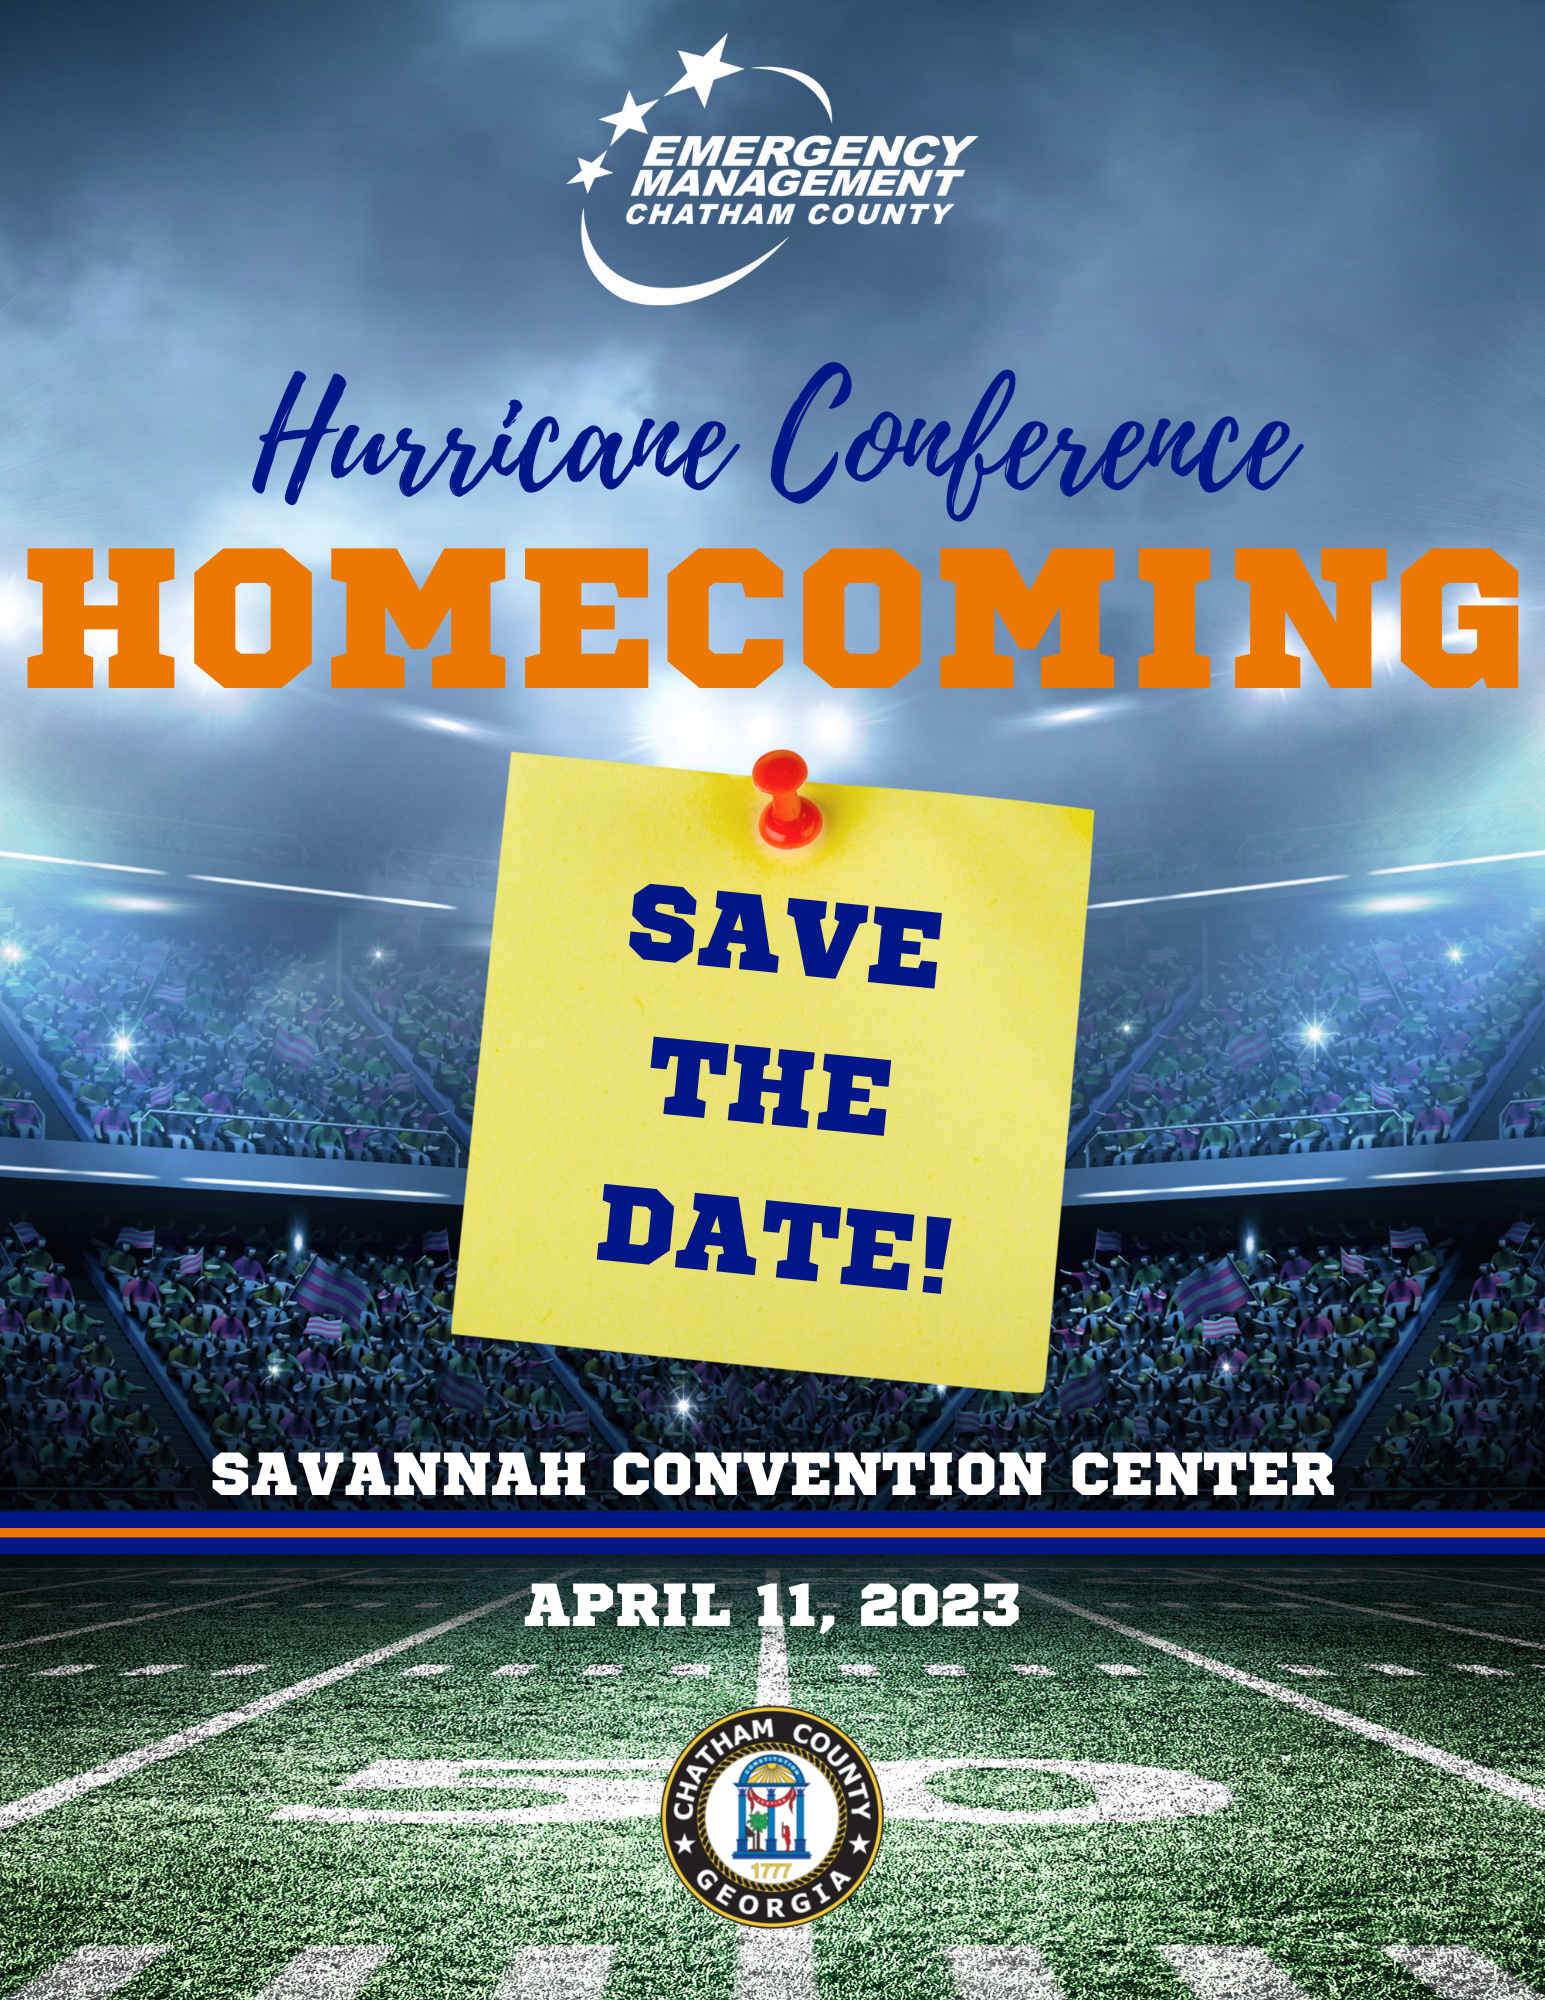 Chatham County Hurricane Conference